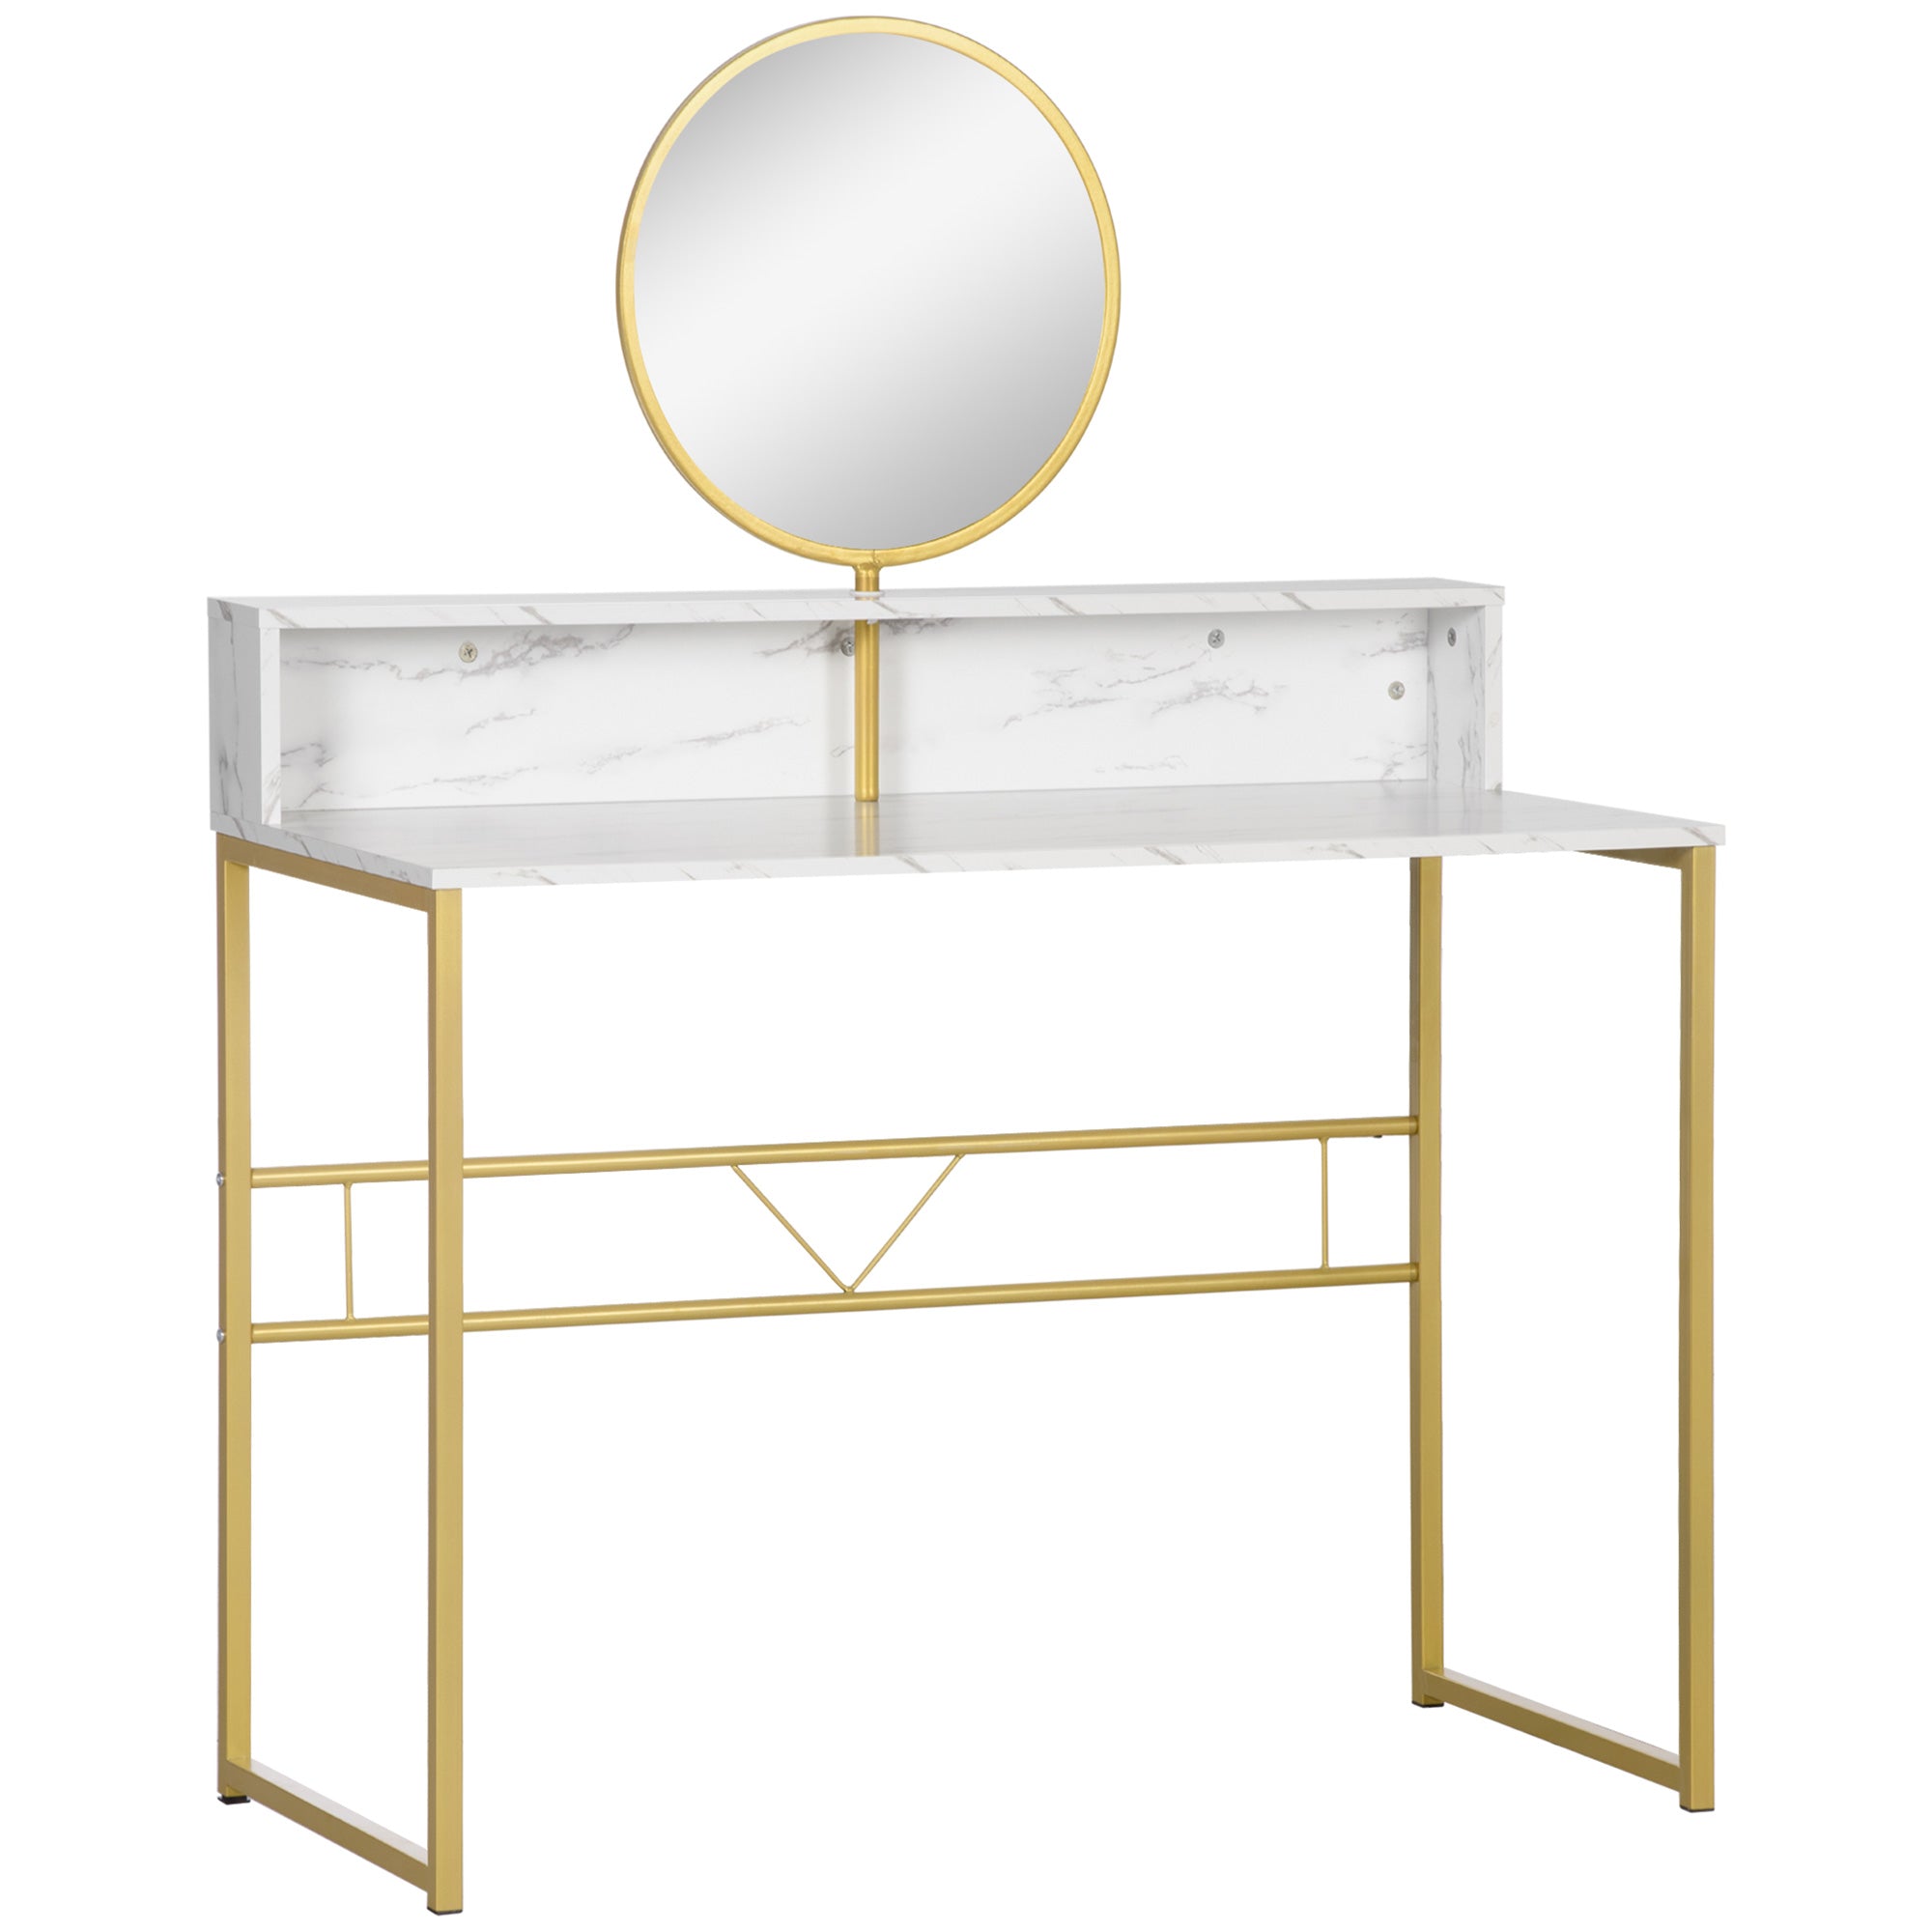 Modern Dressing Table with Round Mirror, Vanity Makeup Desk with Open Storage, Faux Marble Texture and Steel Frame for Bedroom, White-0